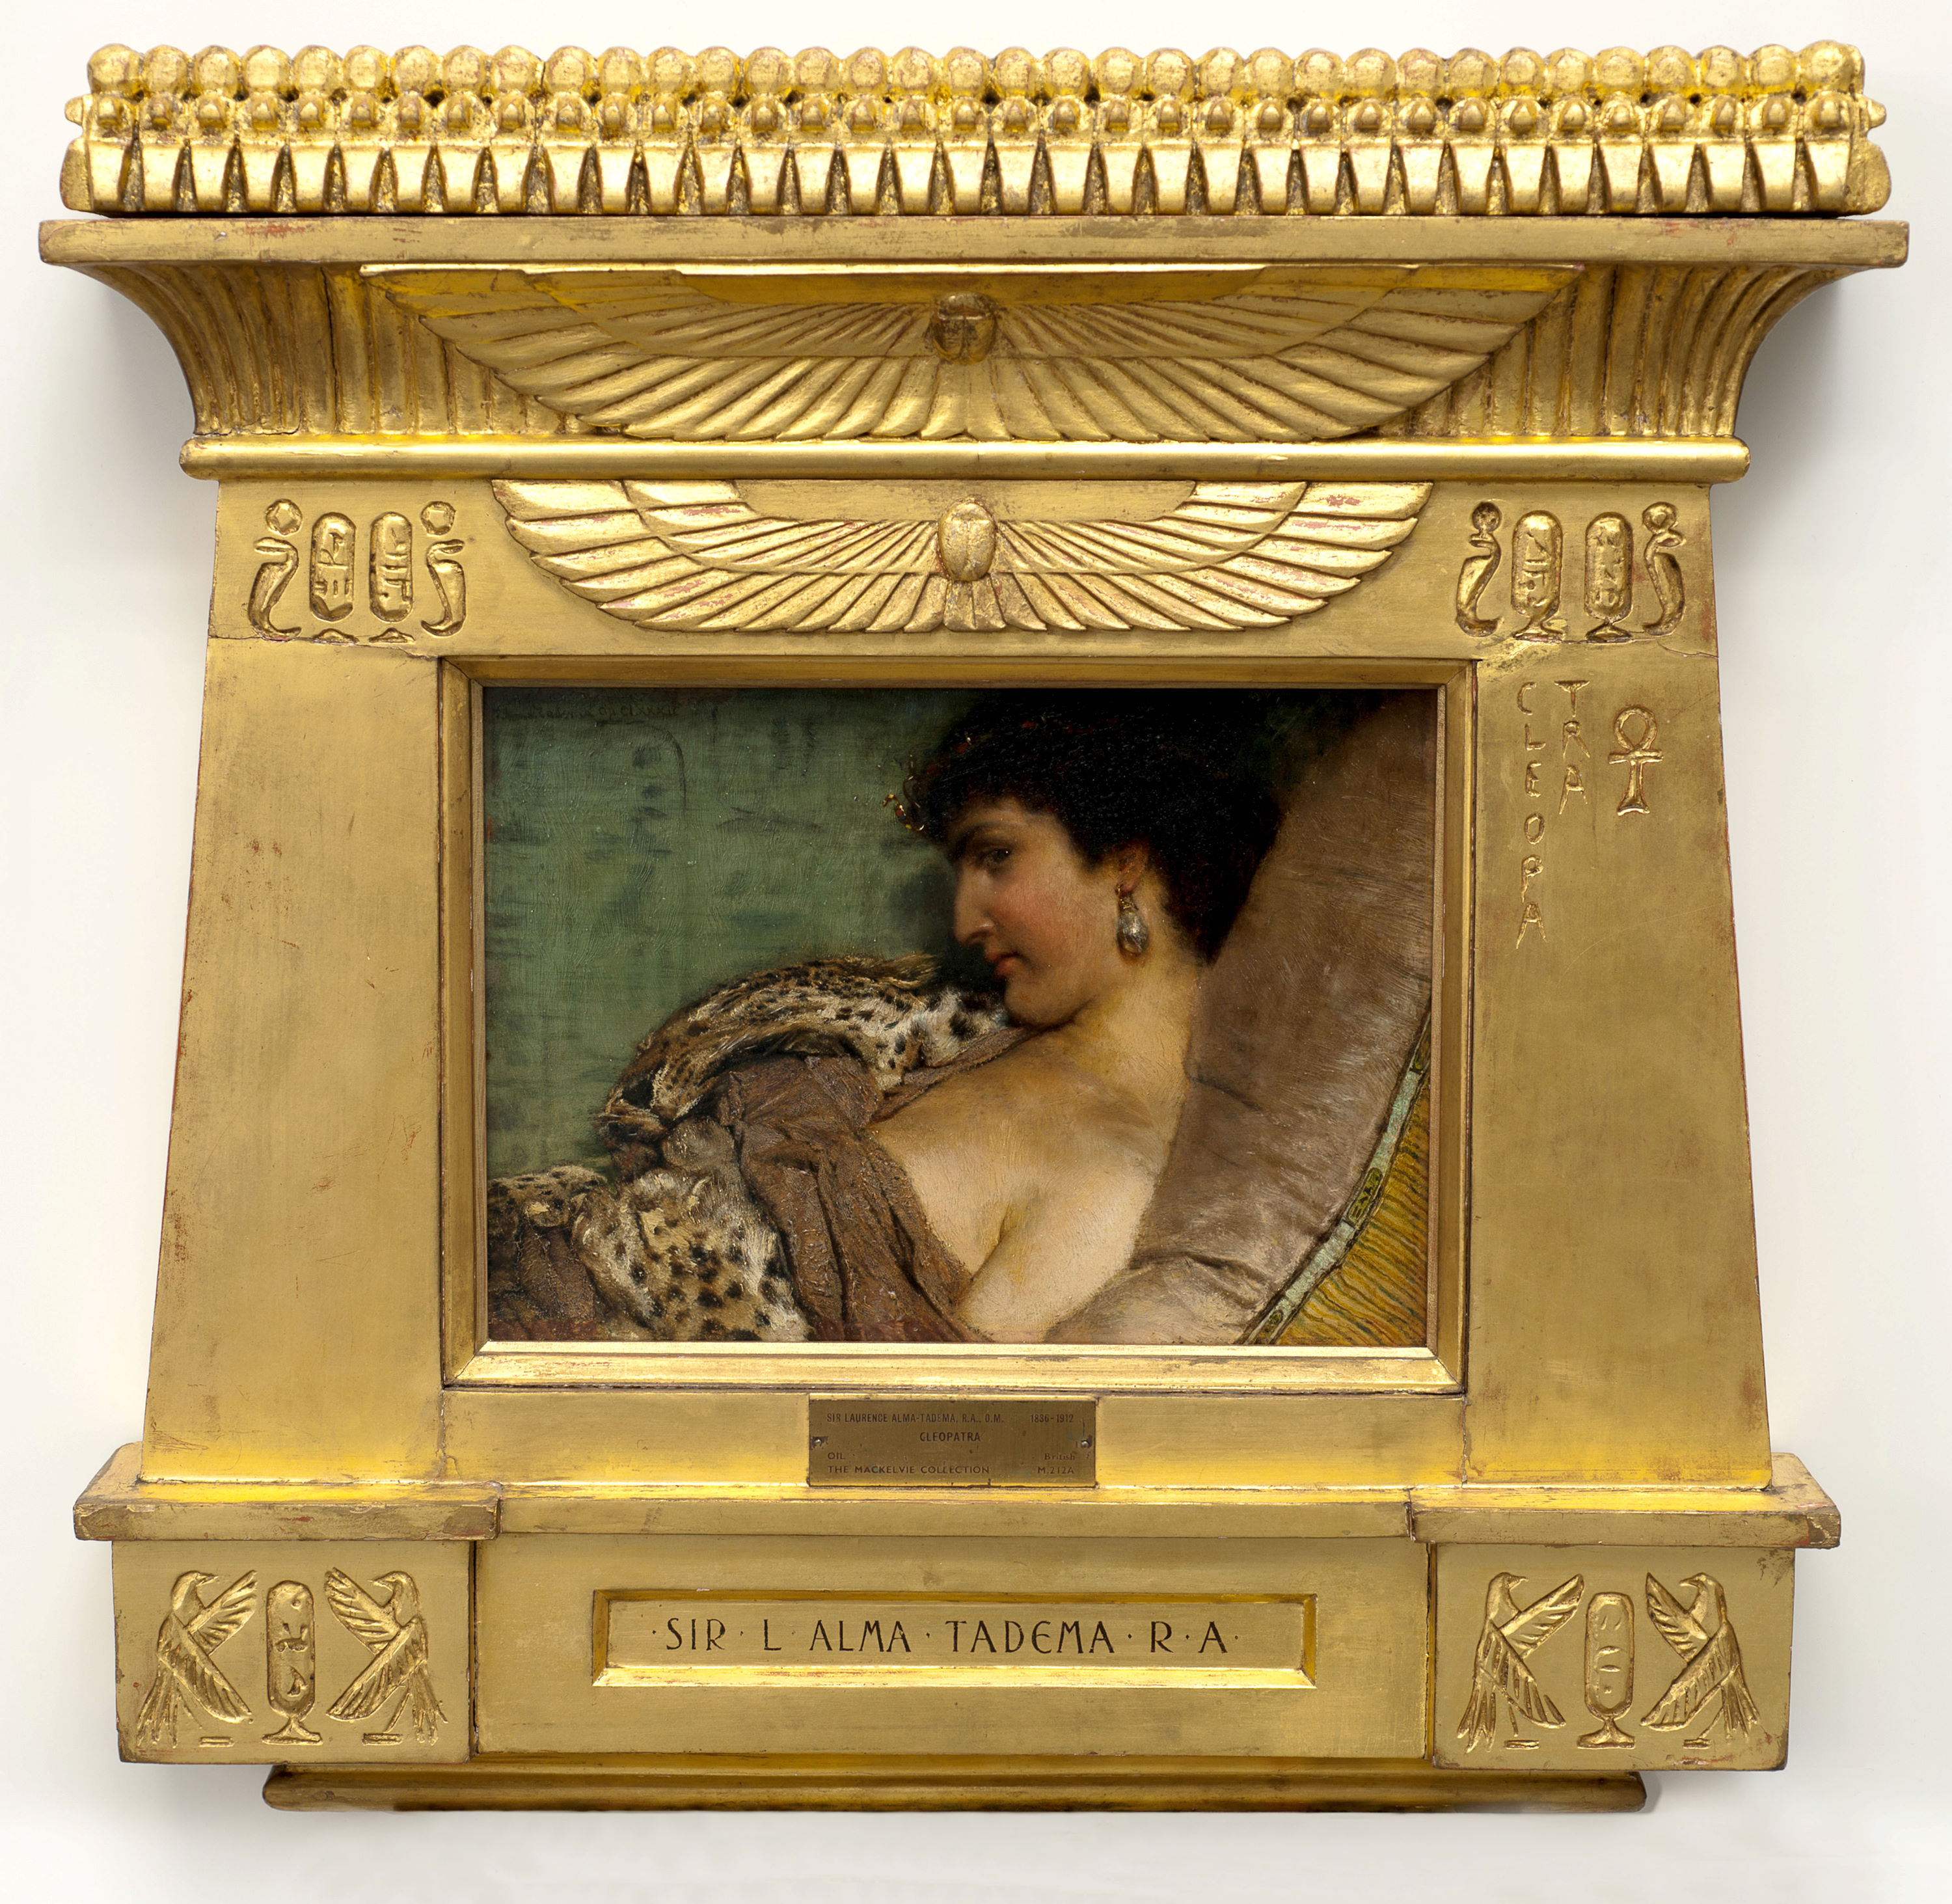 <p><strong>Lawrence Alma-Tadema</strong><br />
<em>Cleopatra</em> 1877<br />
Mackelvie Trust Collection, Auckland Art Gallery Toi o Tāmaki, purchased 1916</p>